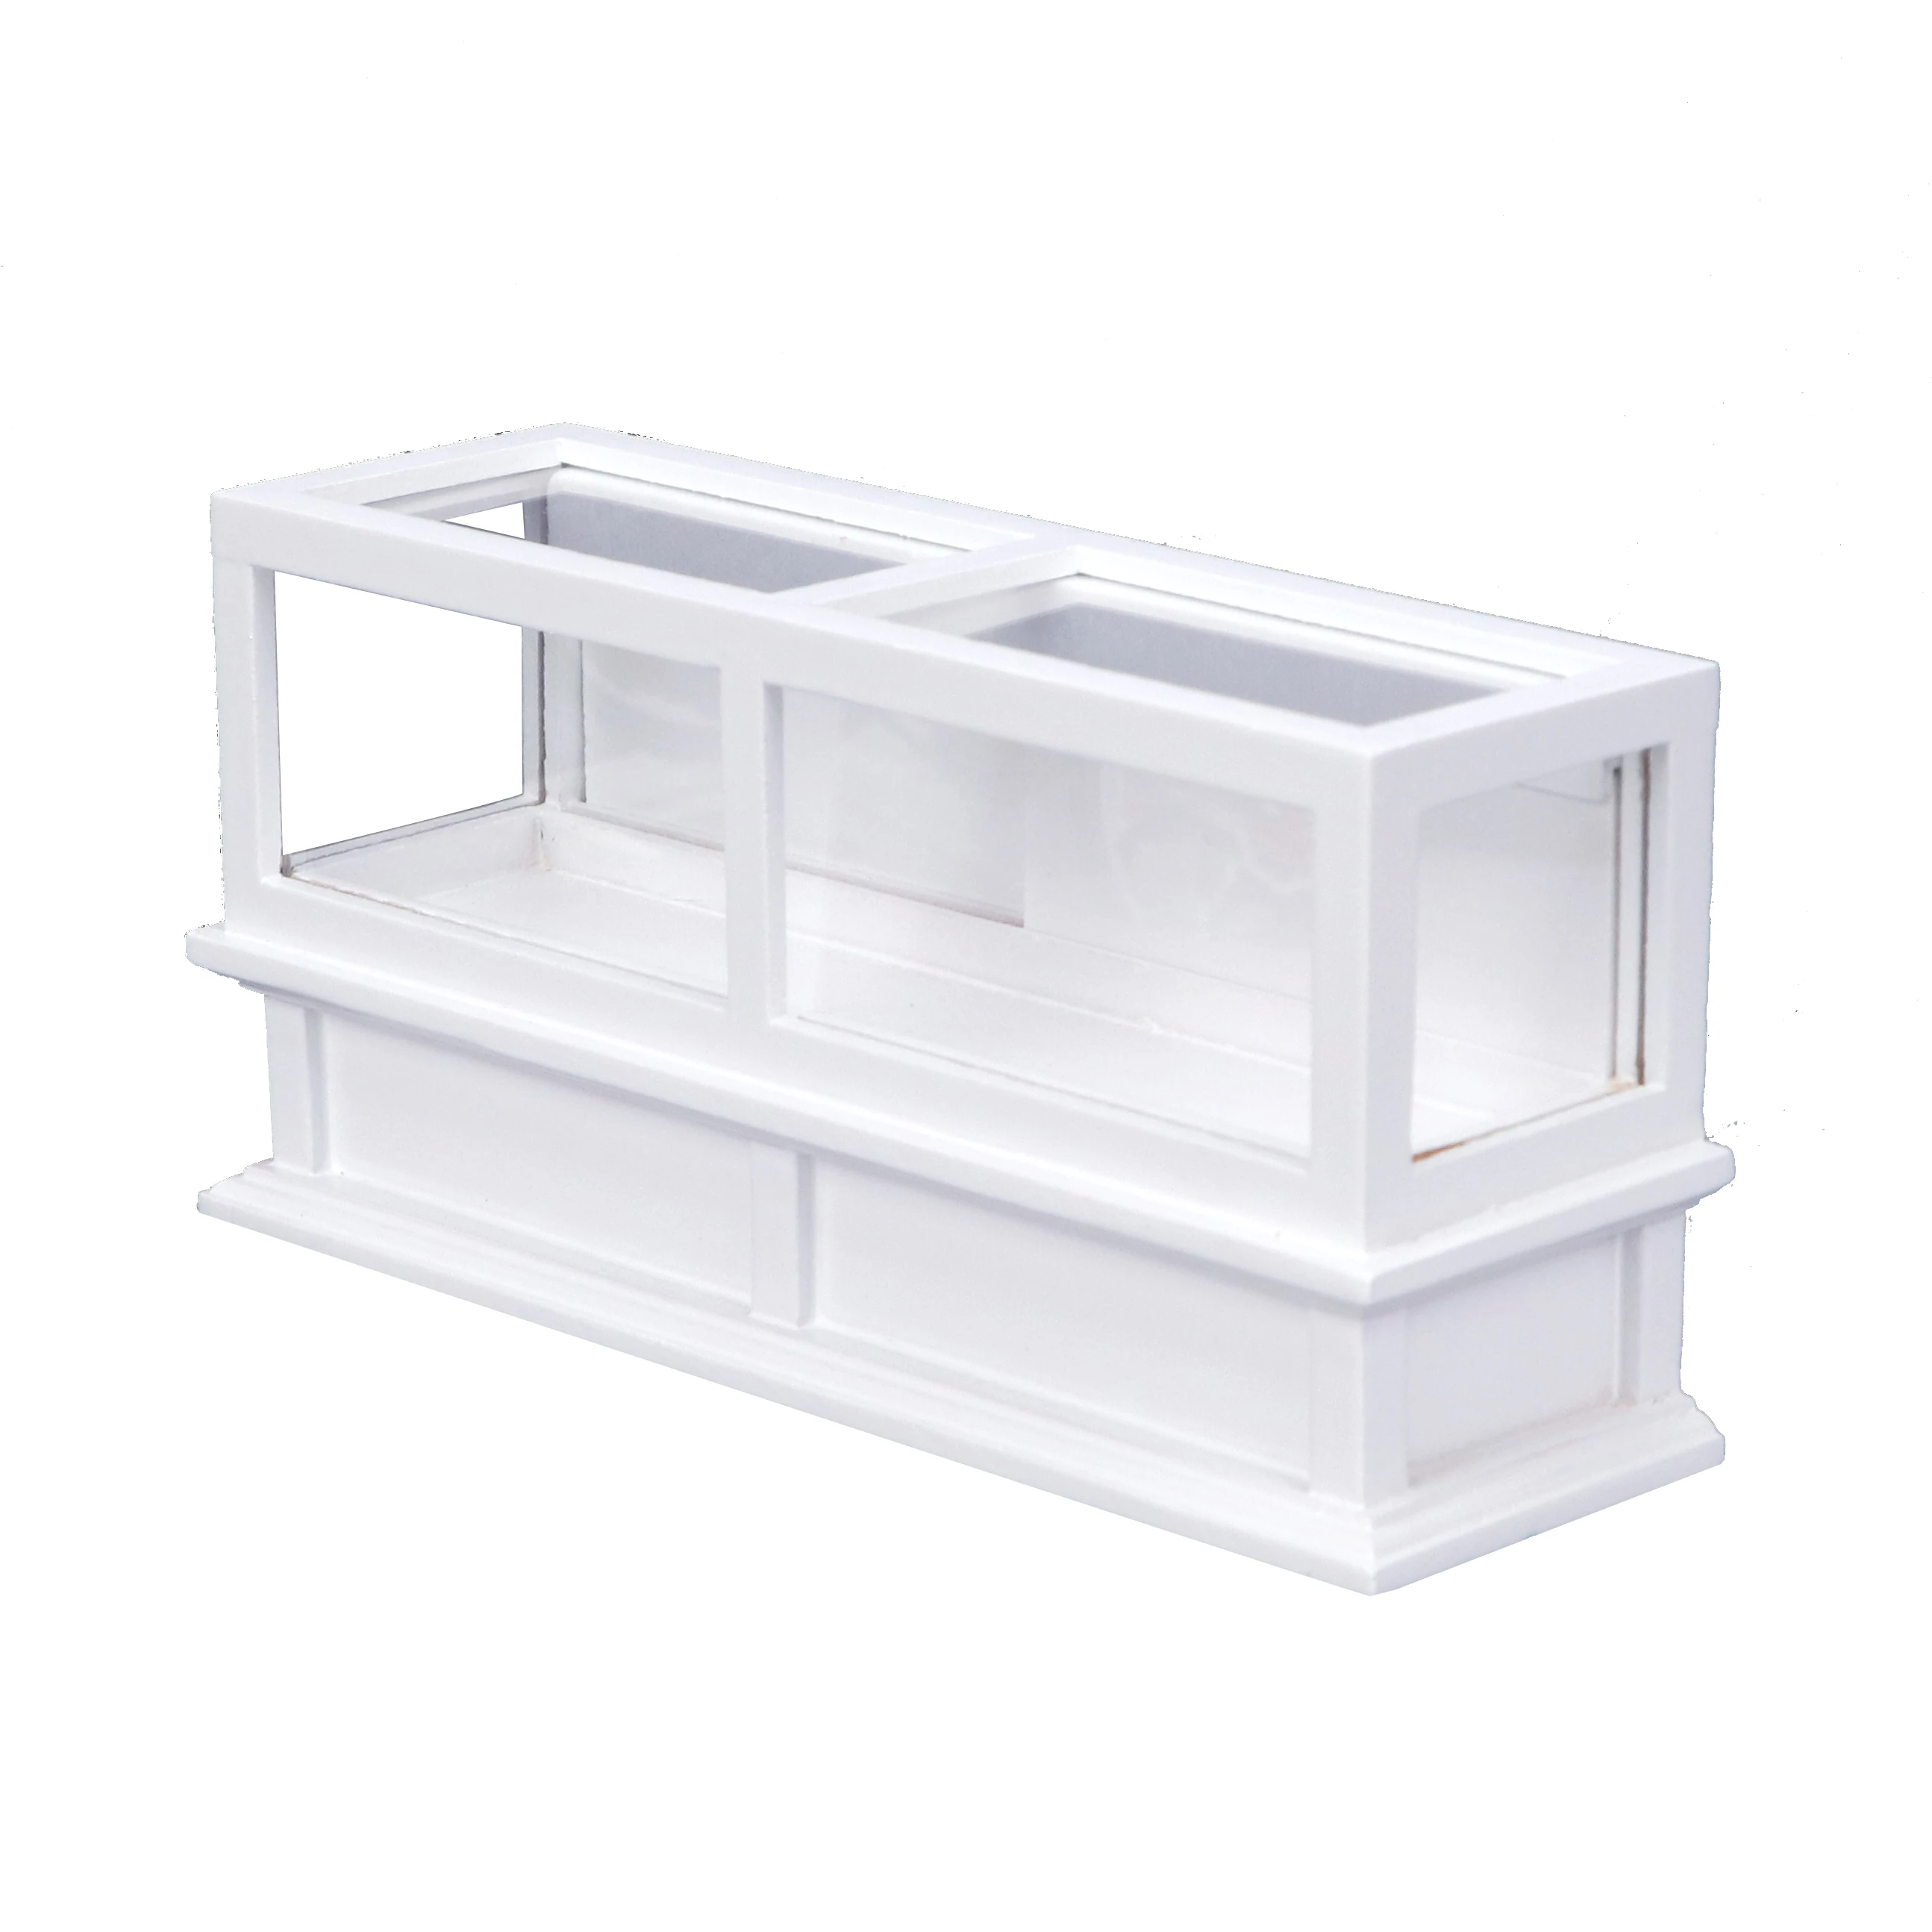 

1:12 doll house dollhouse mini furniture shopping mall store Micro scene decoration white cabinet display cabinet